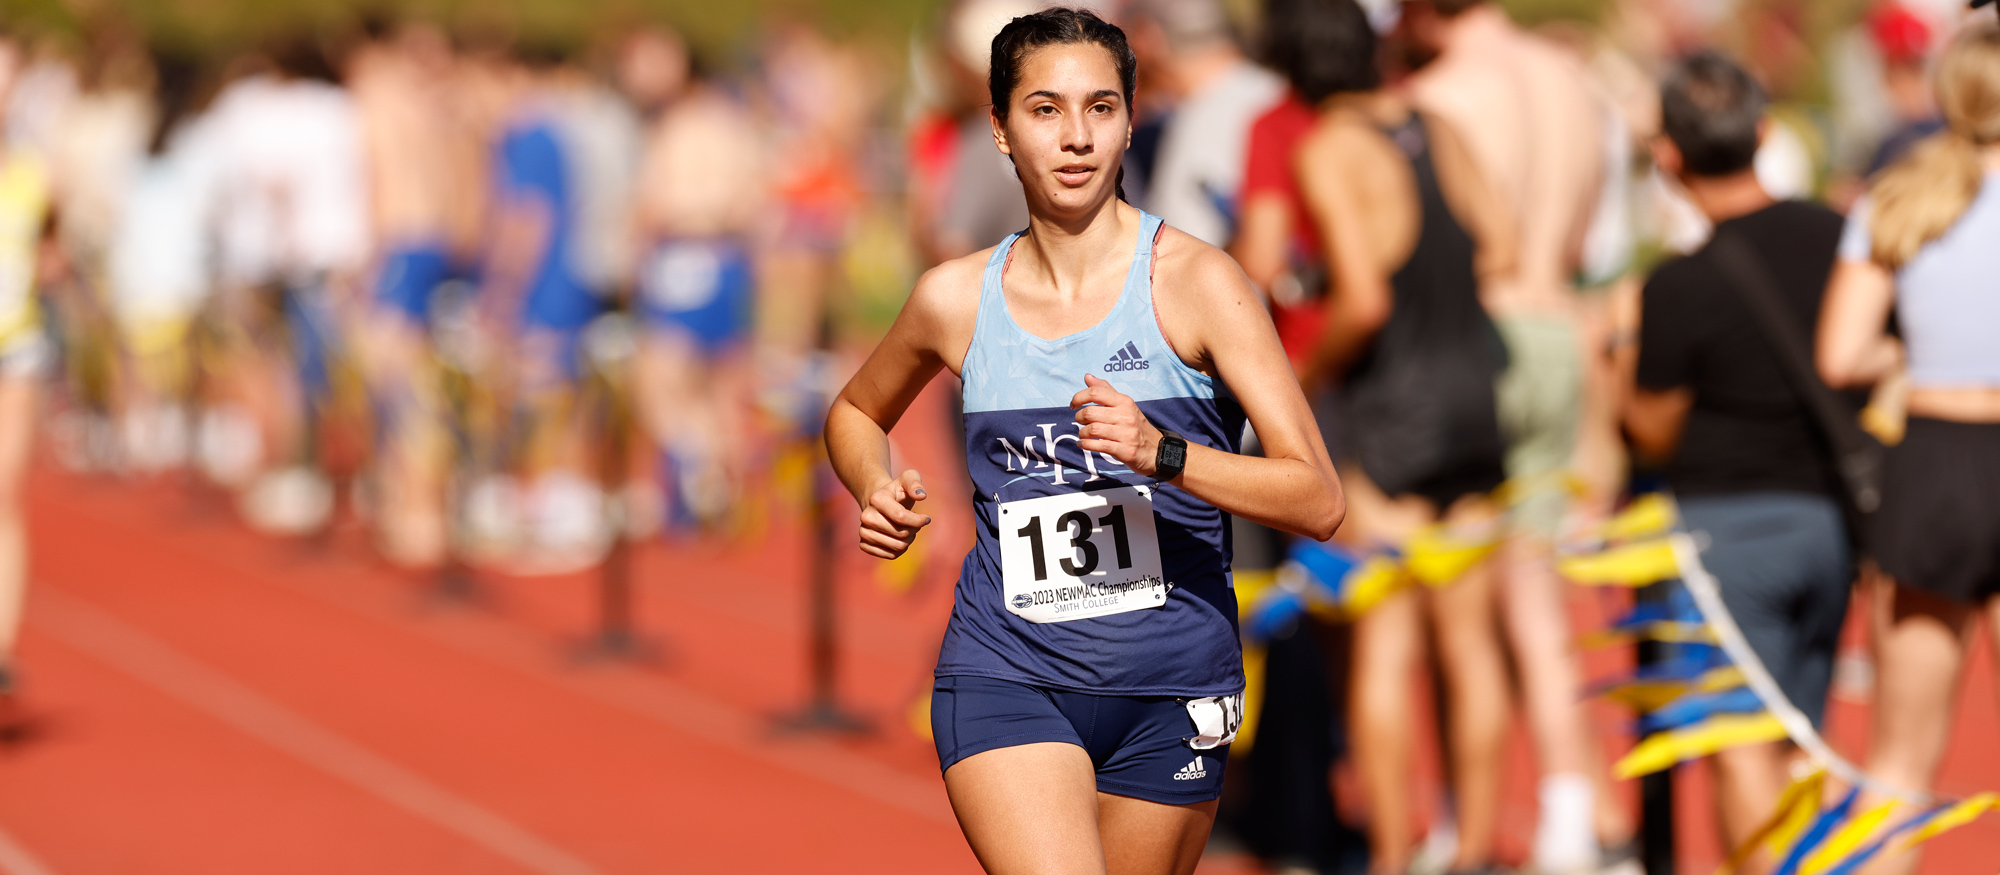 Kim Beaver placed 88th among 176 individual runners, second fastest for Mount Holyoke, at the NCAA Mideast Regional Championships at Stanley Park in Westfield, Mass., on Nov. 11, 2023. (File photo by Frank Poulin/Courtesy of Smith College)